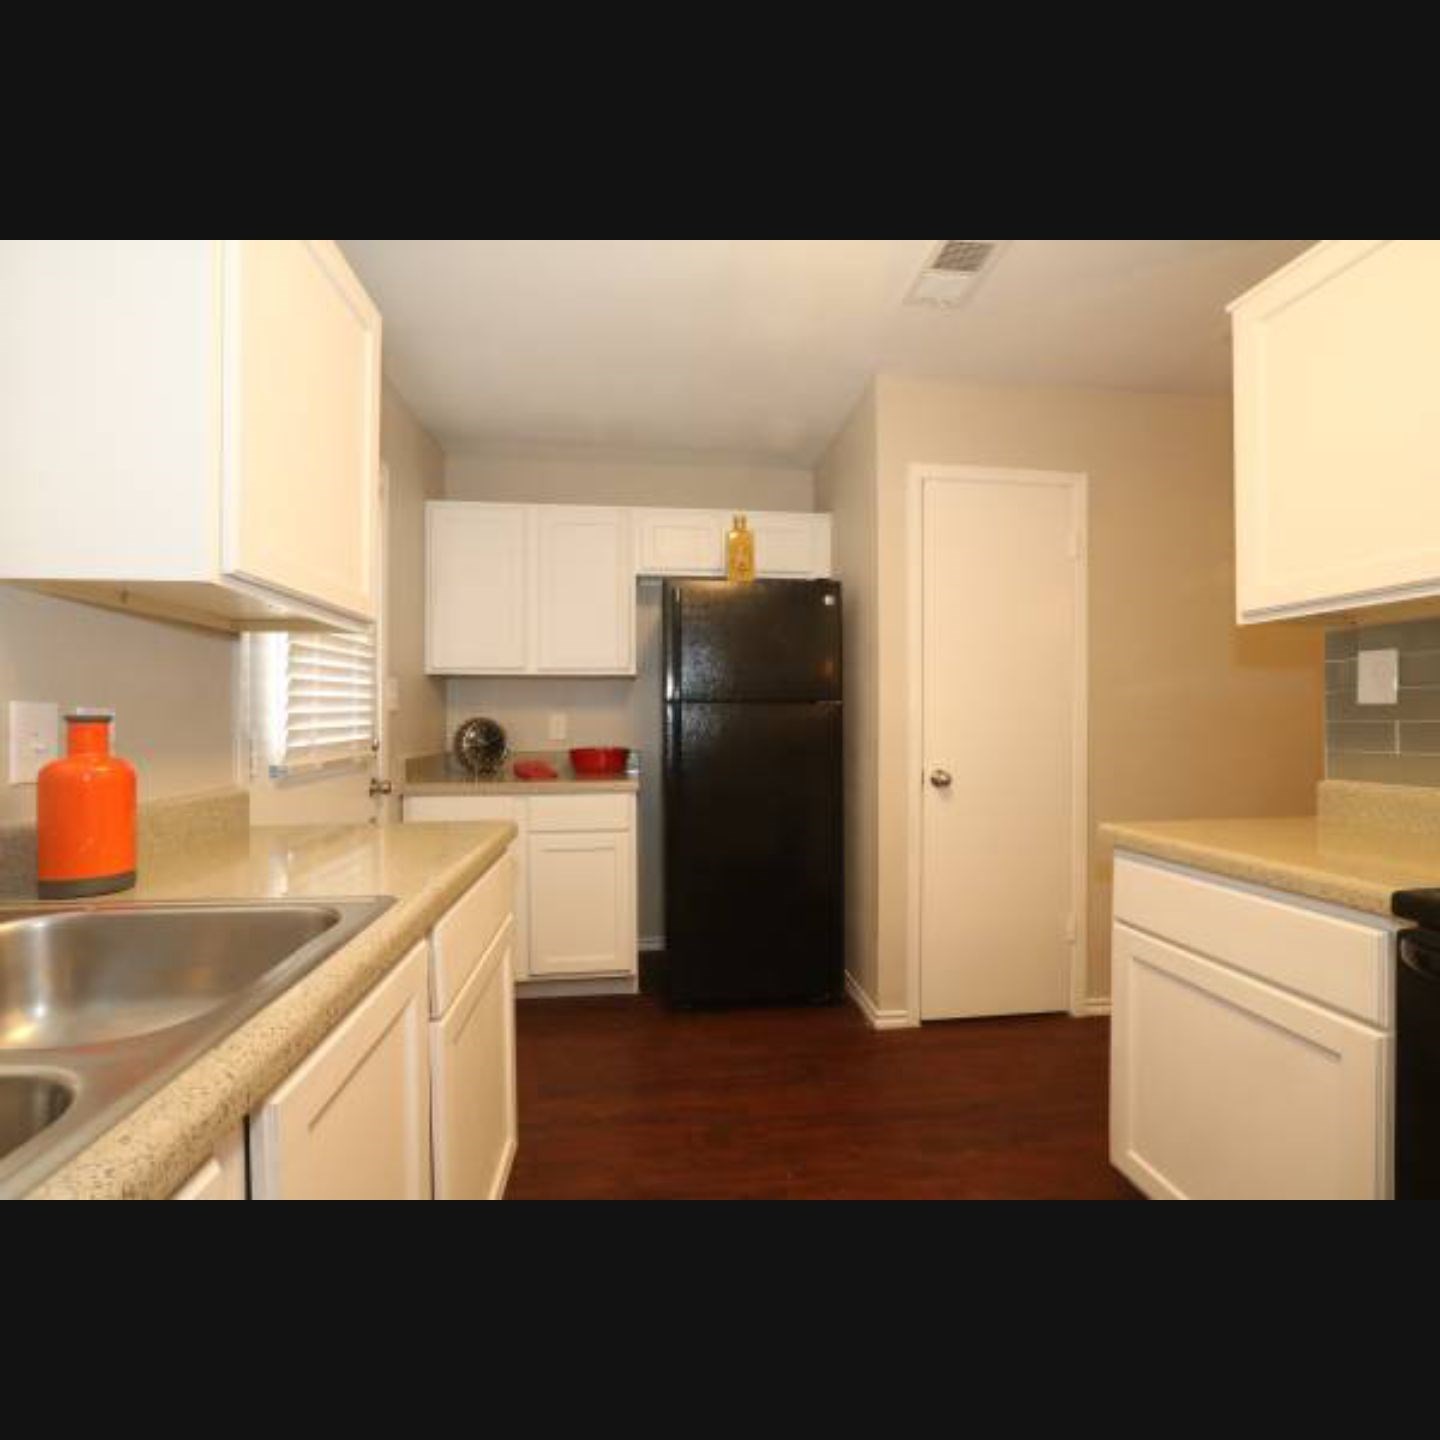 Single Room Available For Rent In A 2 Bed Room 1 Bath House